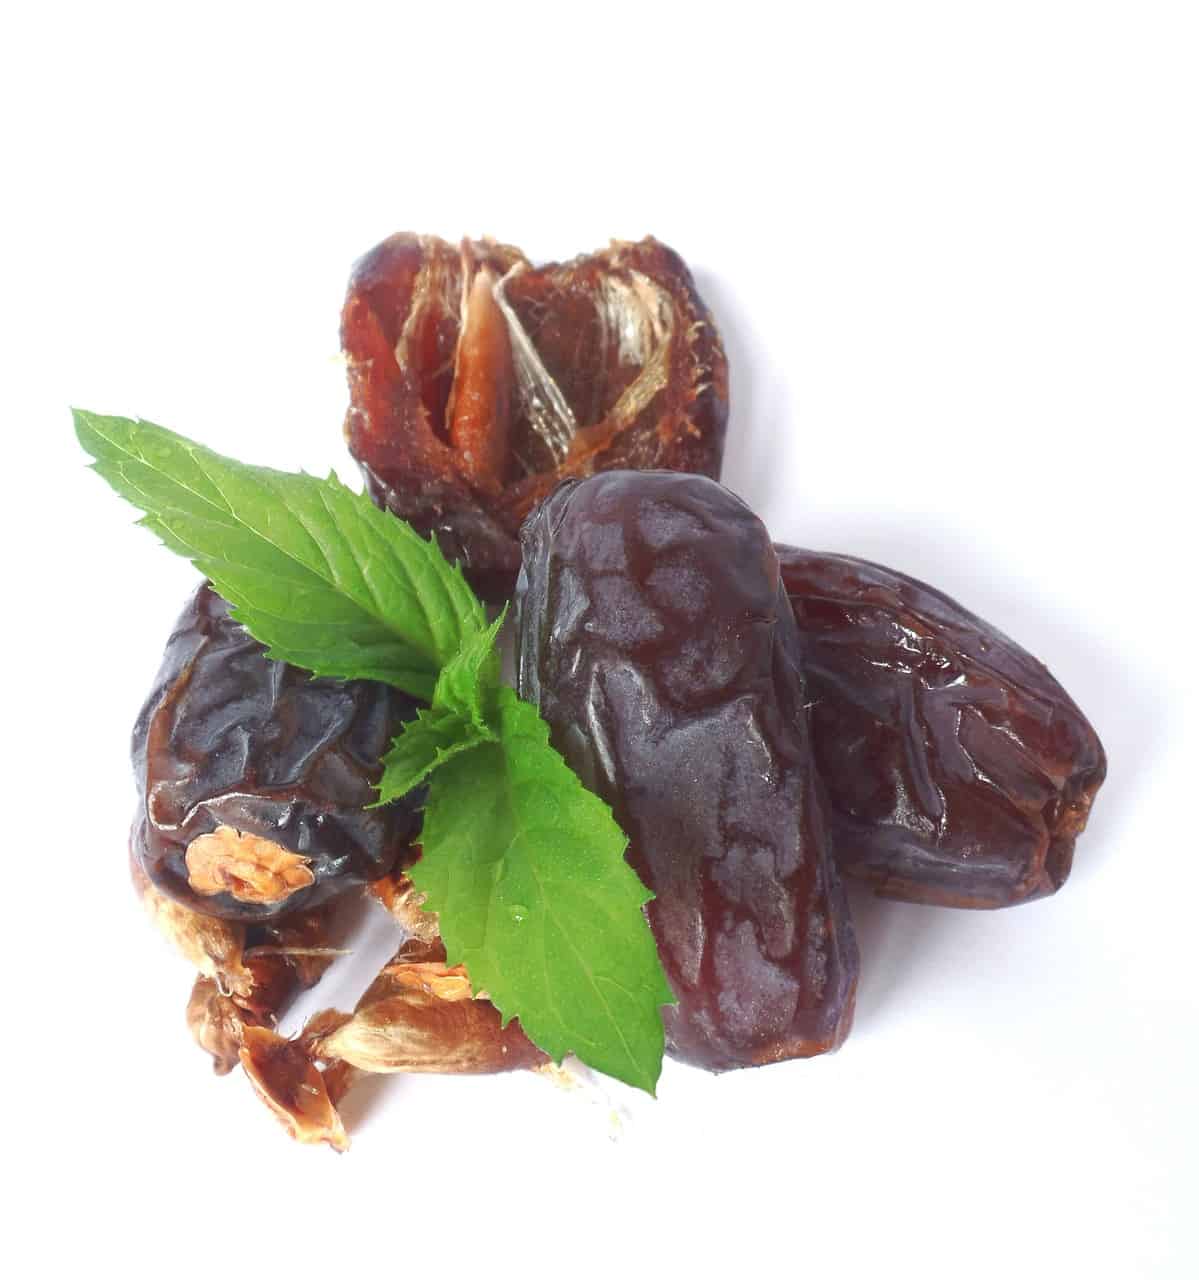 Medjool dates piled on top of eachother with a sprig of mint in the center.